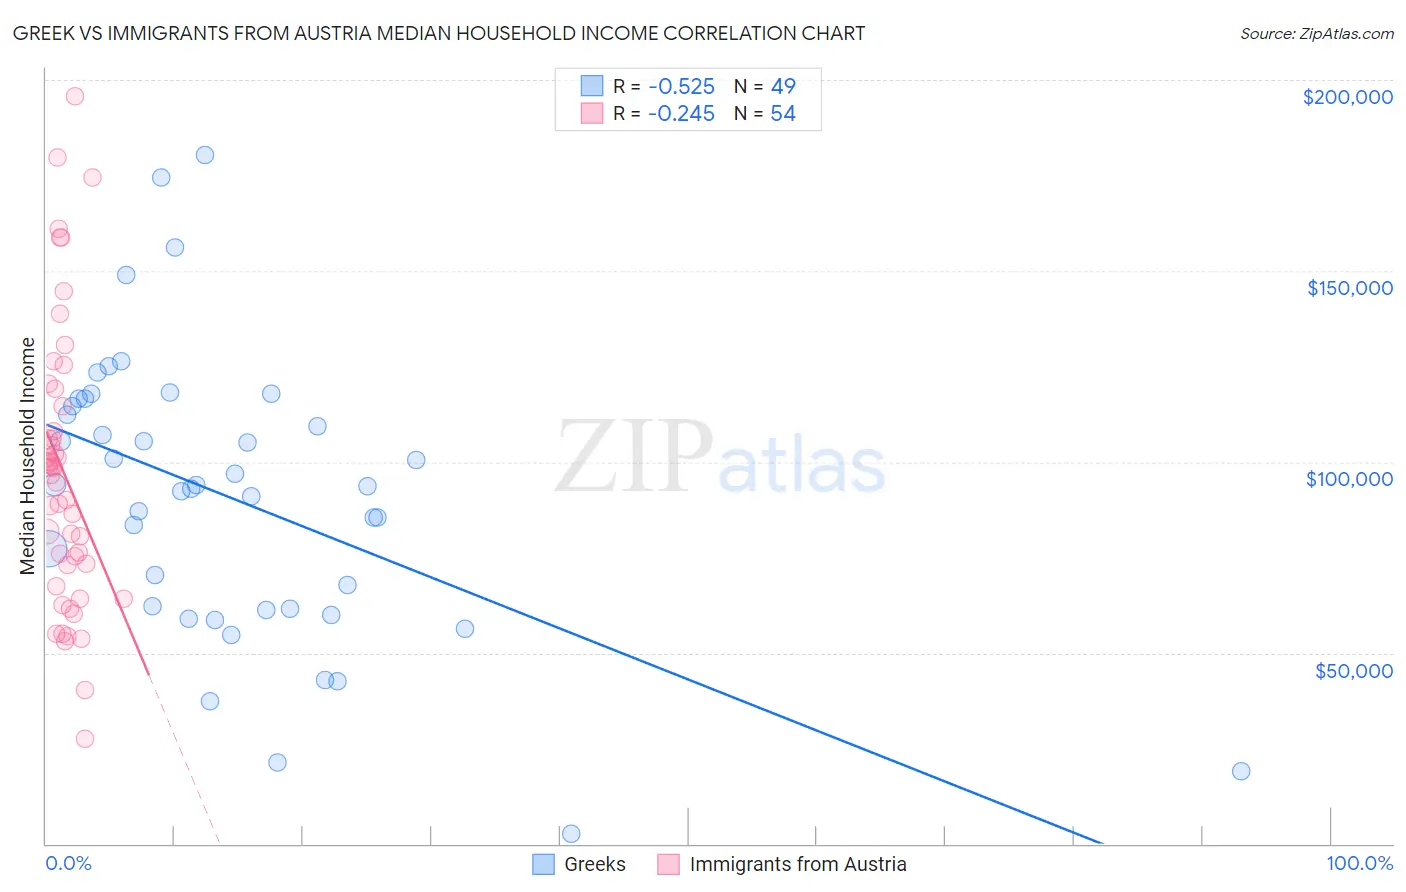 Greek vs Immigrants from Austria Median Household Income